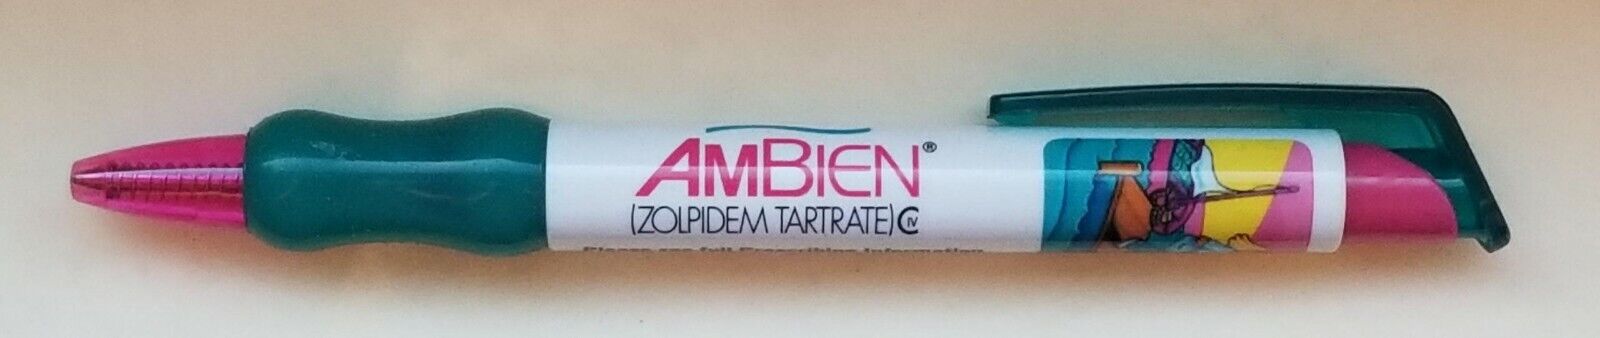 New RARE Ambien TEAL GEL Ink Pen Drug Rep Pharmaceutical Collectible Hard 2 Find